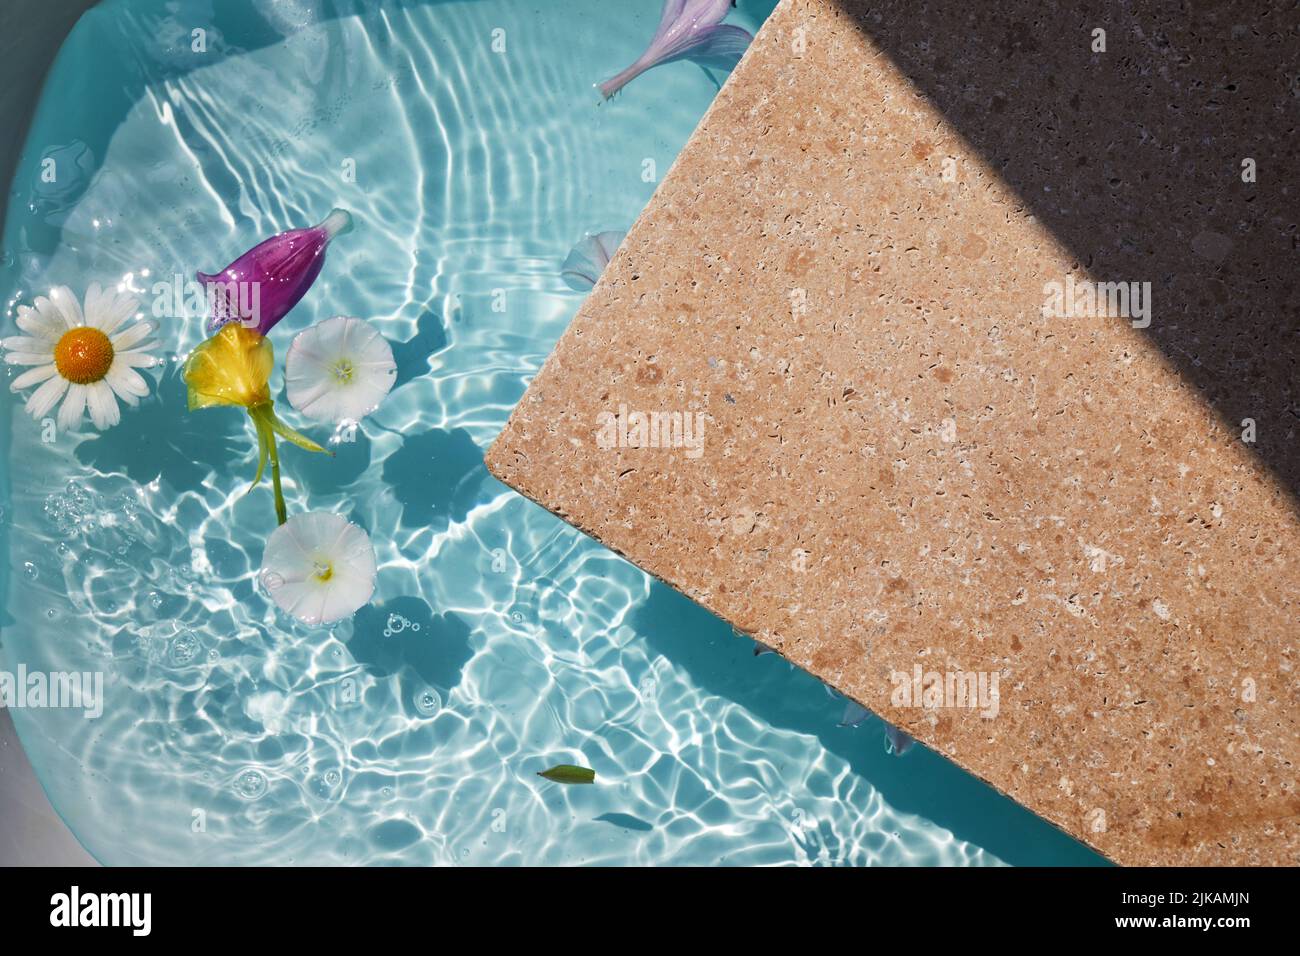 Product promotion Beauty cosmetic showcase. Travertine stone display with flowers in water. Stock Photo